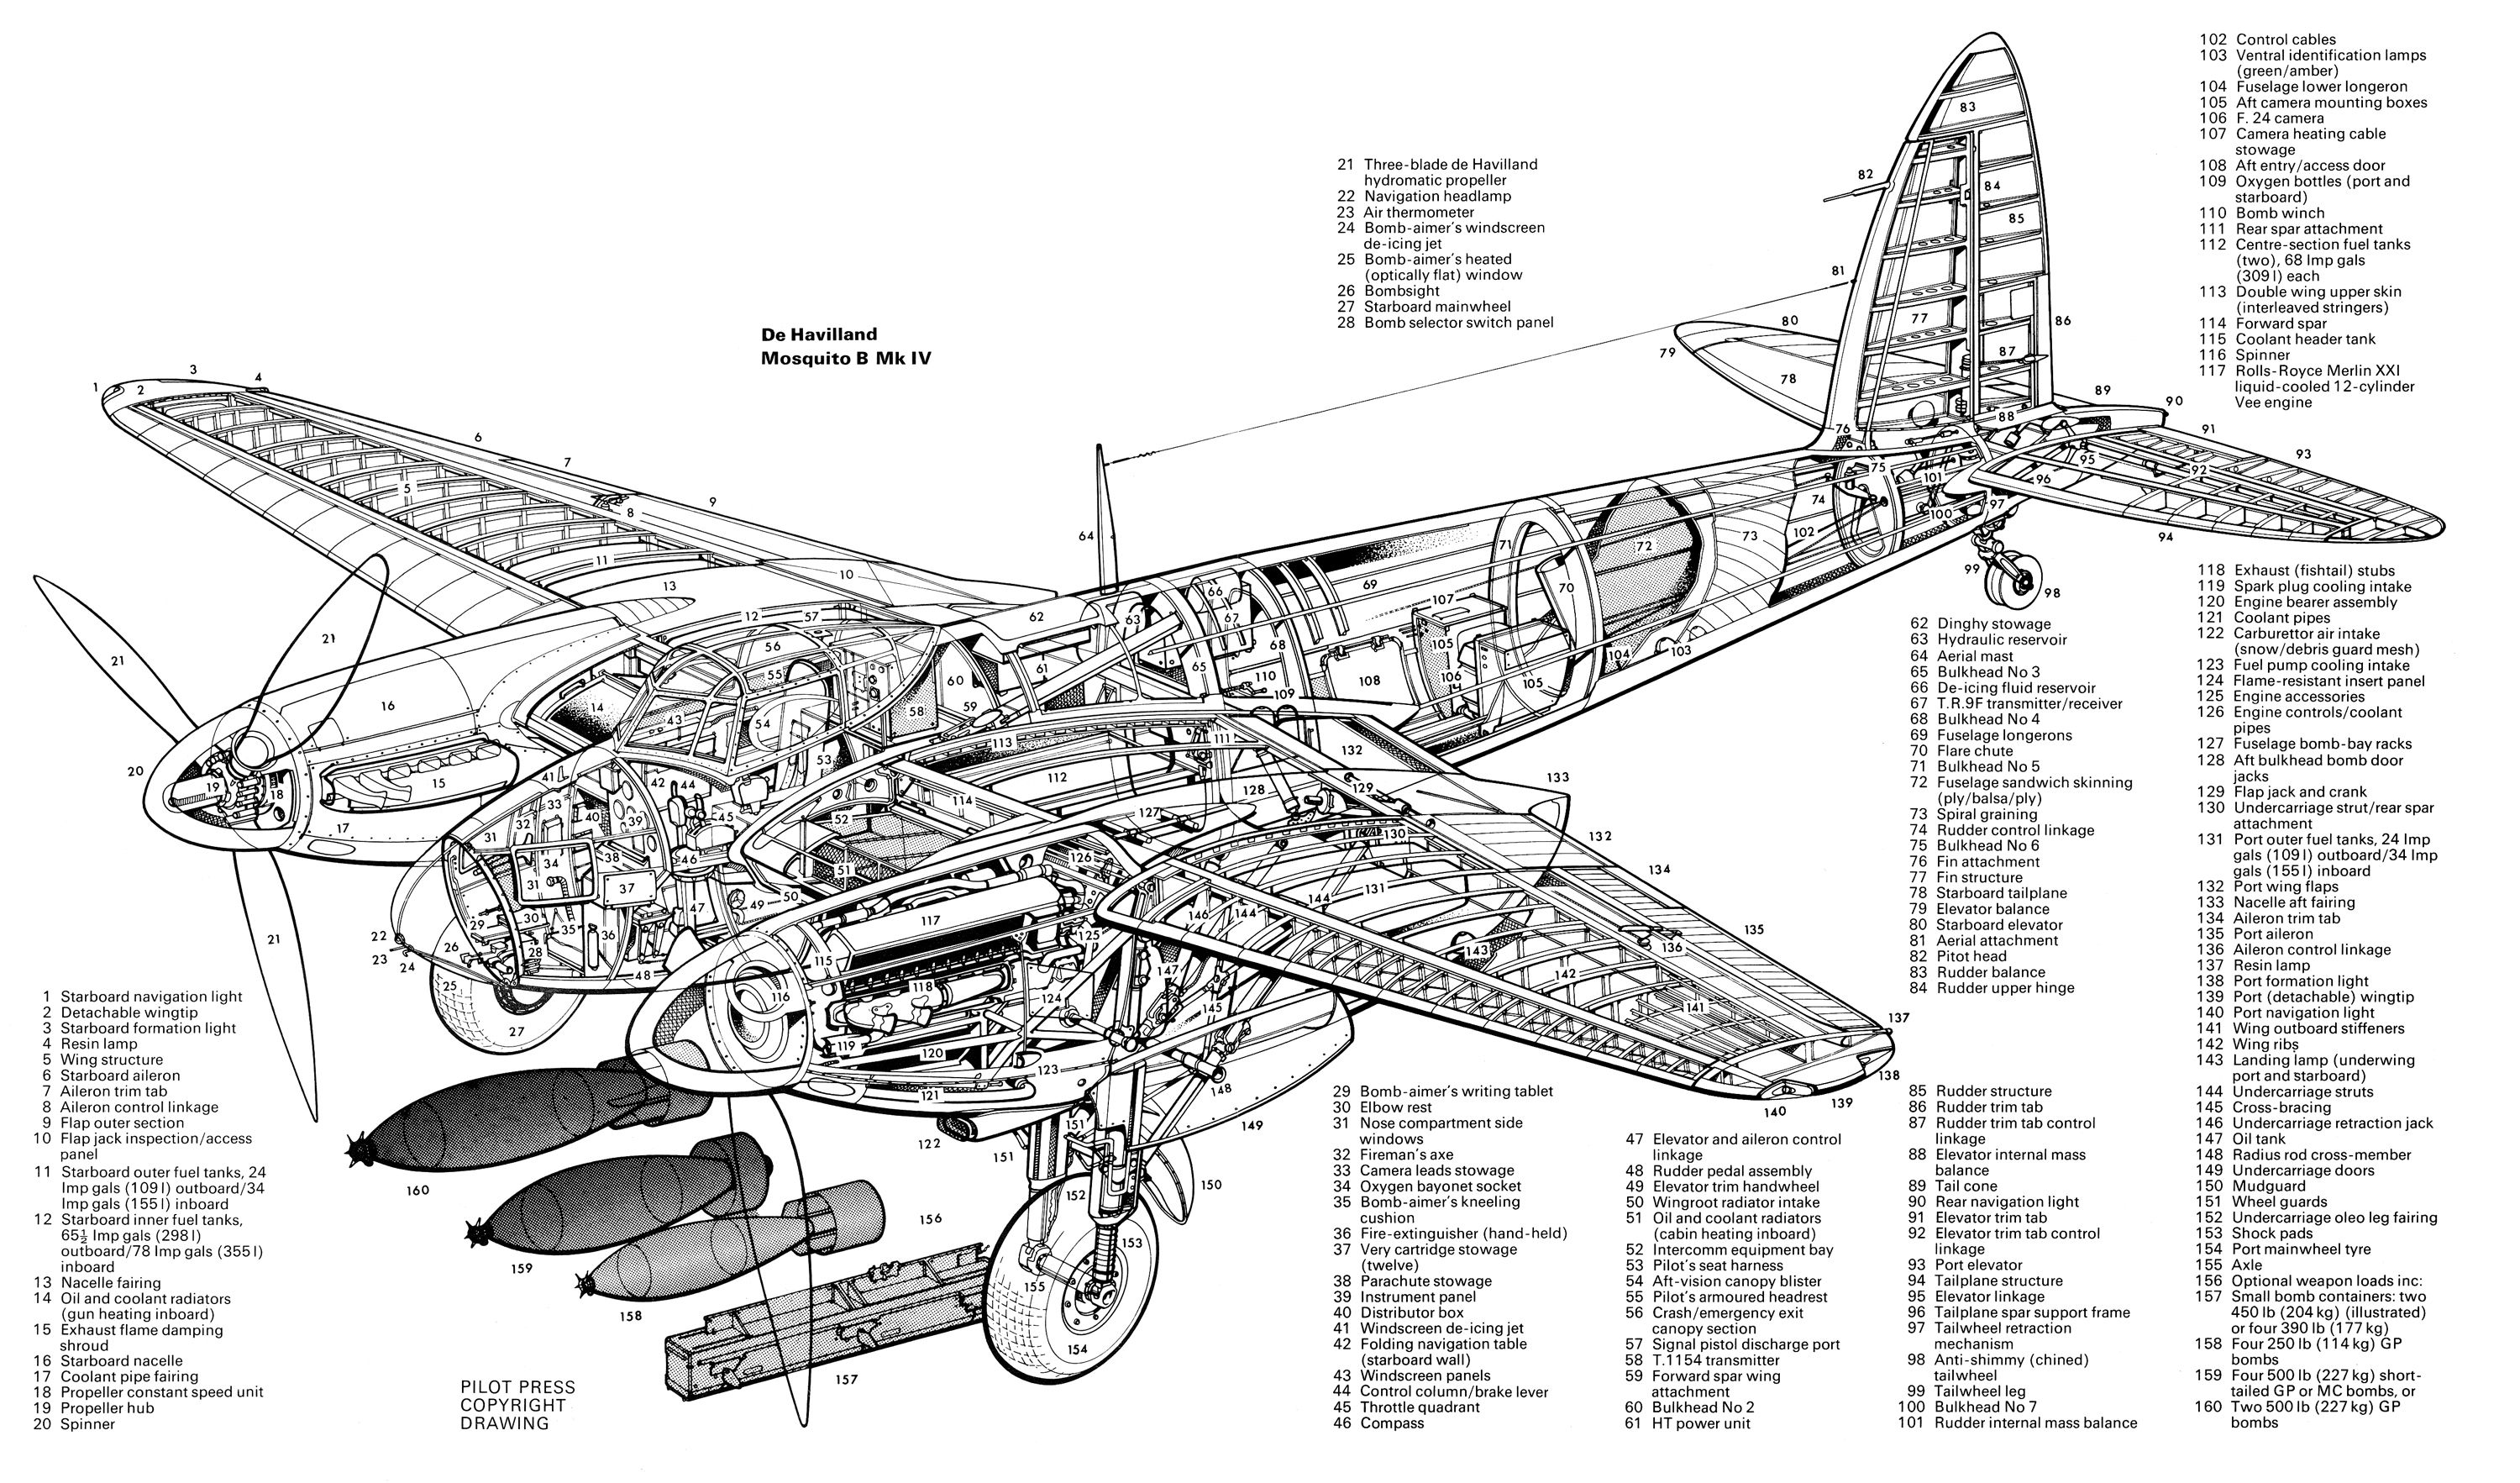 General 3000x1765 airplane blueprints De Havilland Mosquito military military aircraft World War II vehicle British aircraft plan cutaway infographics military vehicle bombs white background text